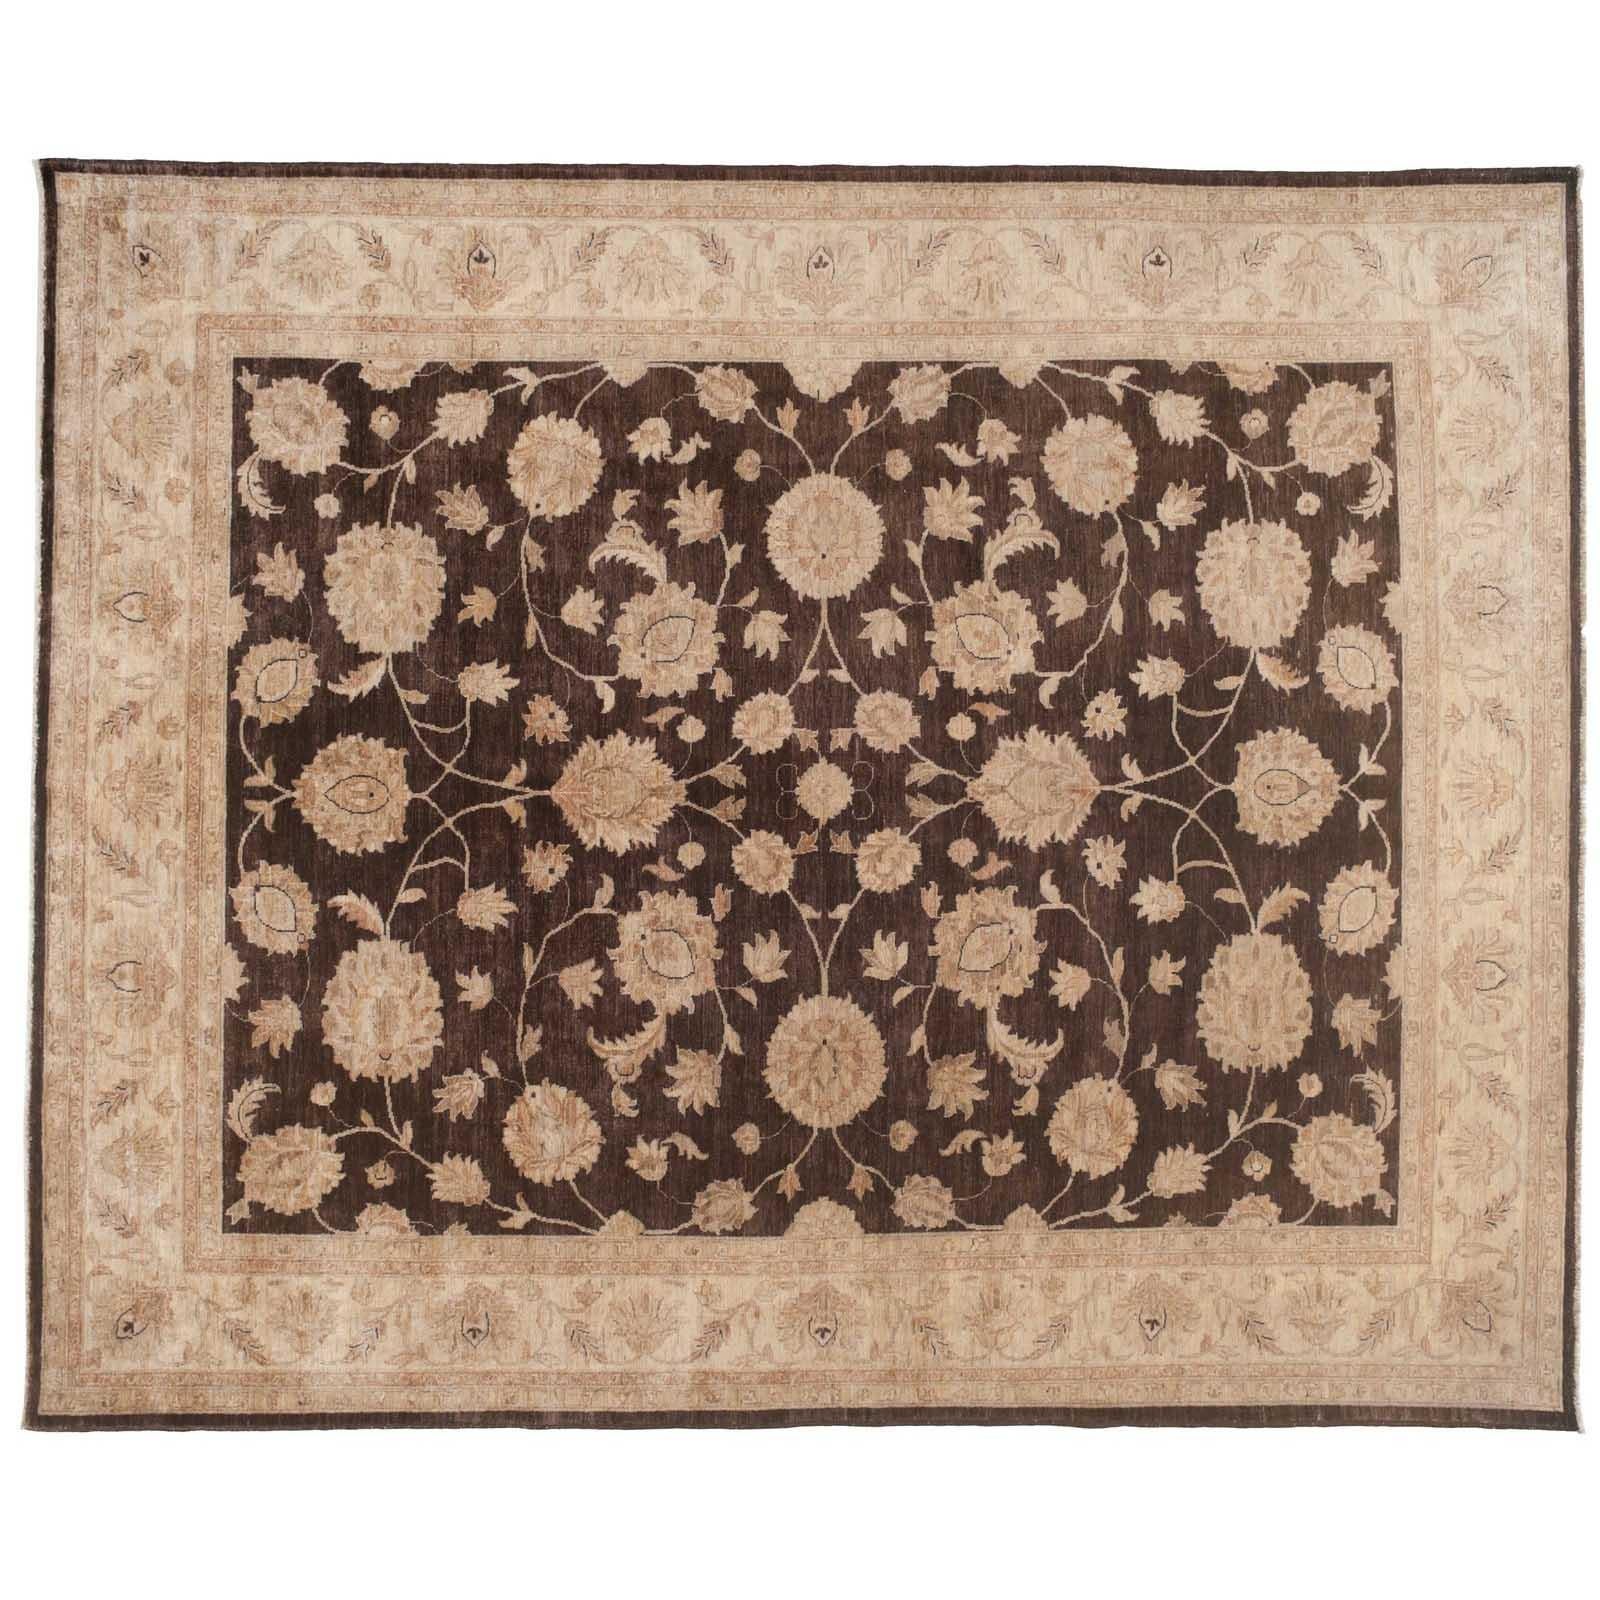 Traditional Pakistani Rug in Brown and Beige